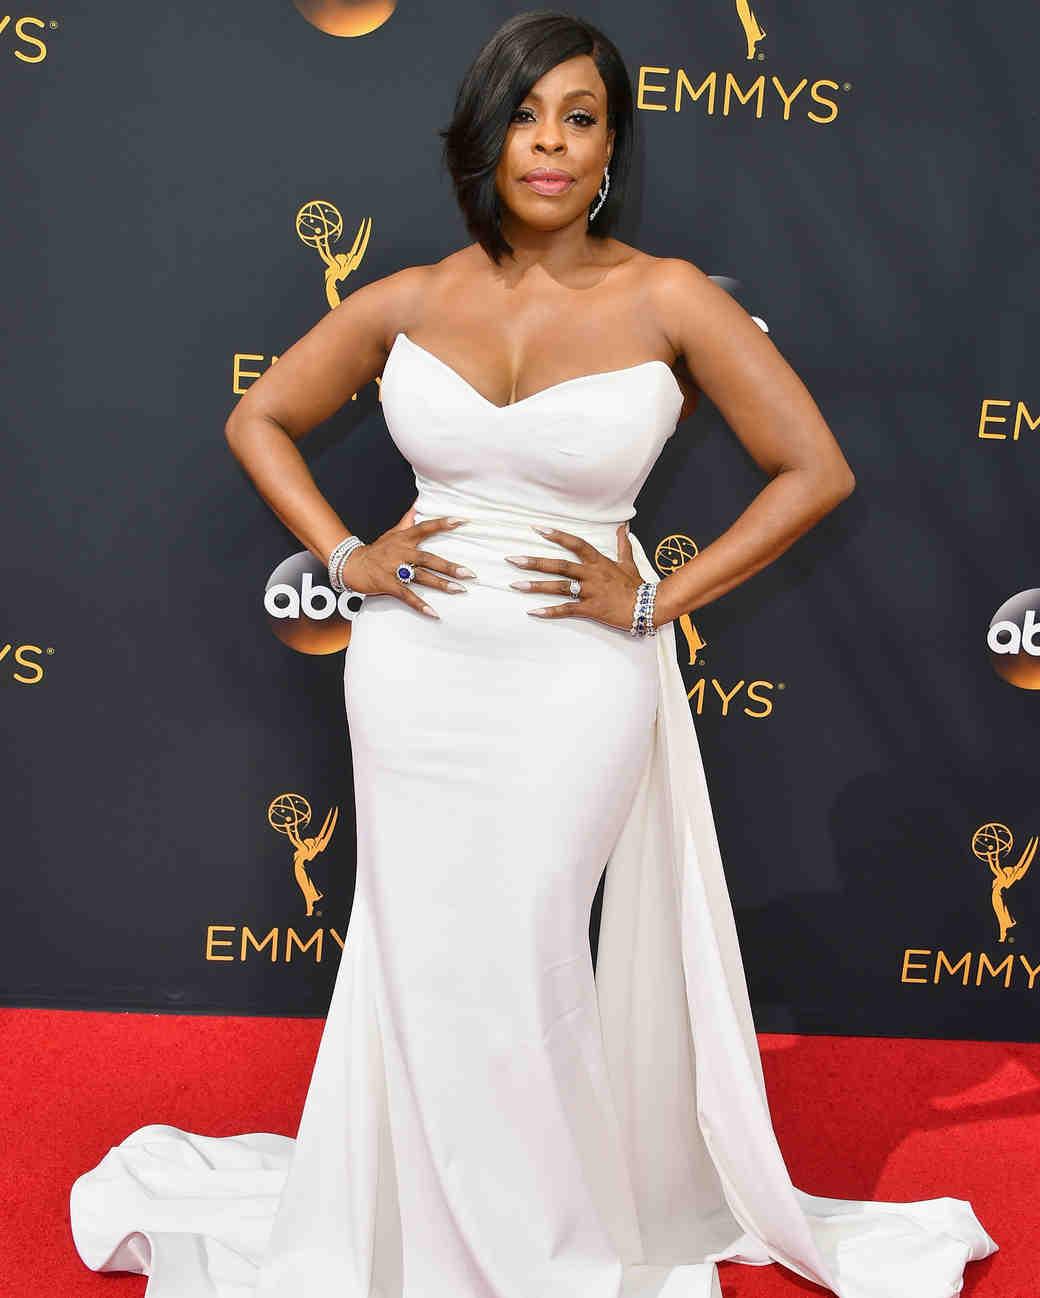 Emmy Awards 2016: The Best Red Carpet Looks to Inspire Your Wedding ...